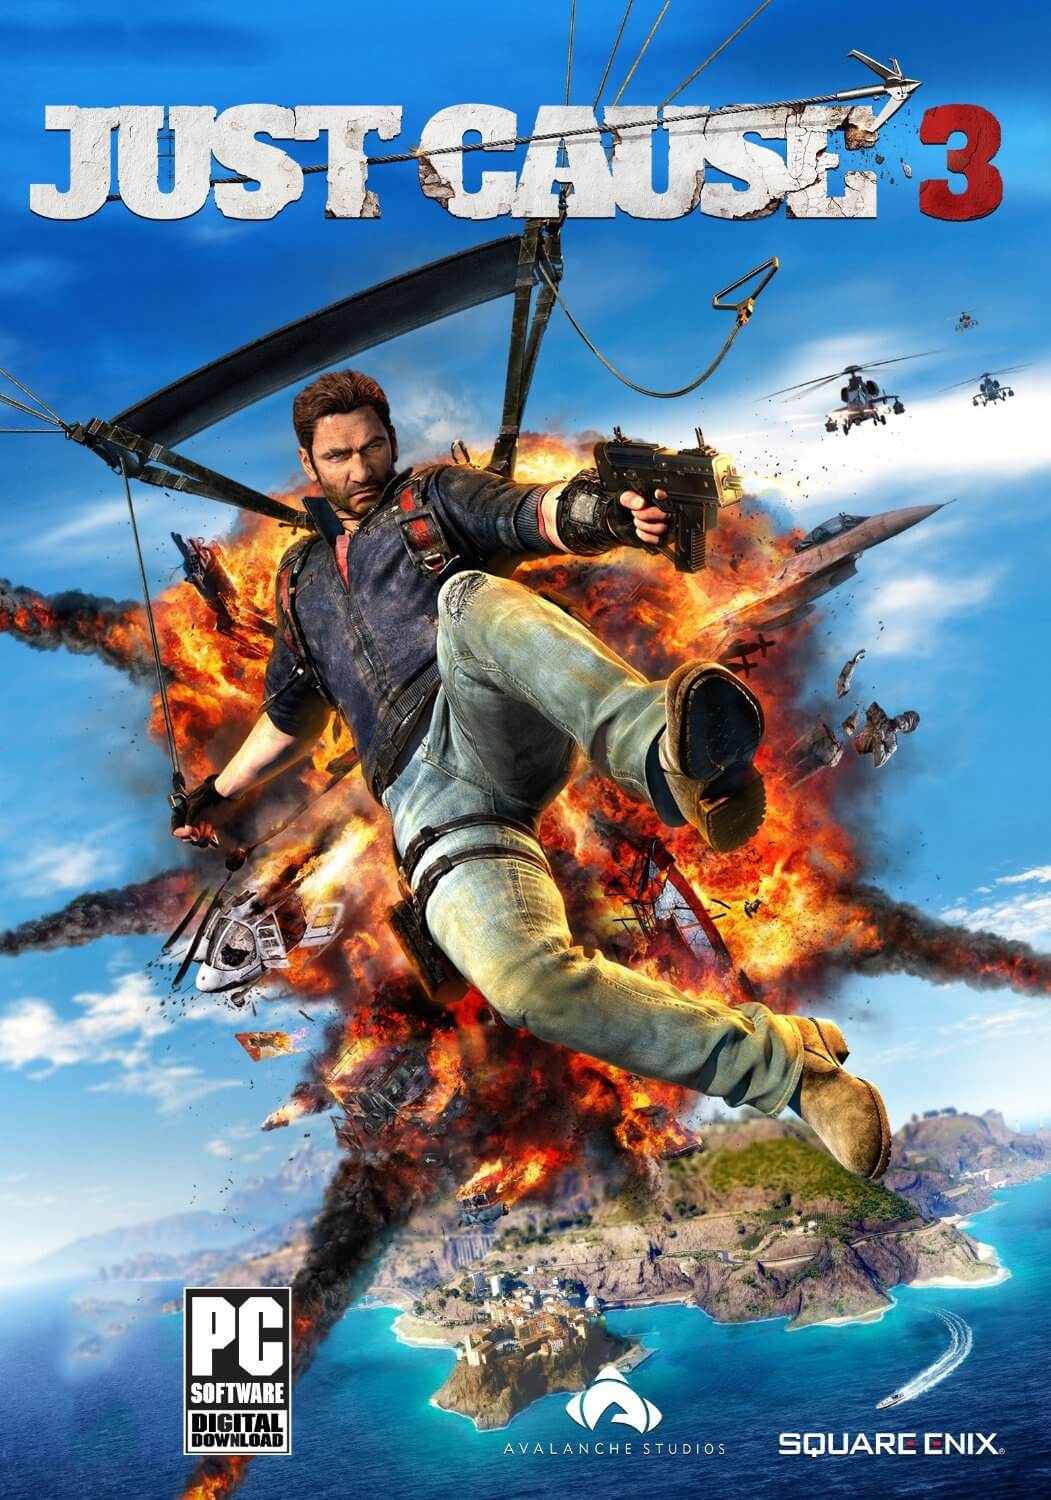 DOWNLOAD JUST CAUSE 3 HIGHLY COMPRESSED FOR PC IN 1 GB PARTS - TRAX GAMING CENTER